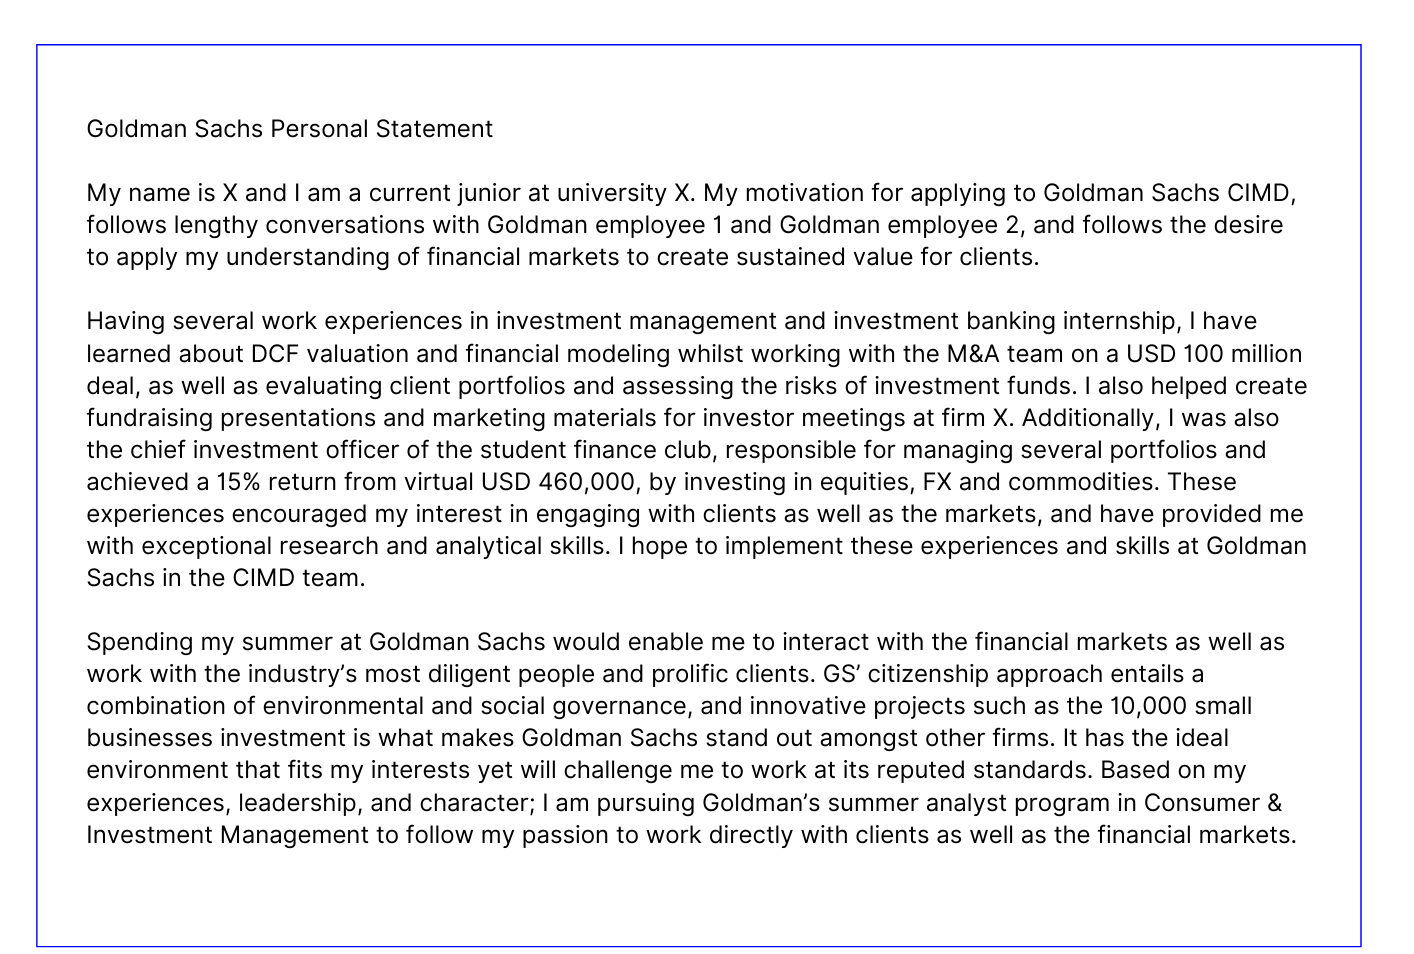 goldman sachs cover letter 300 words example